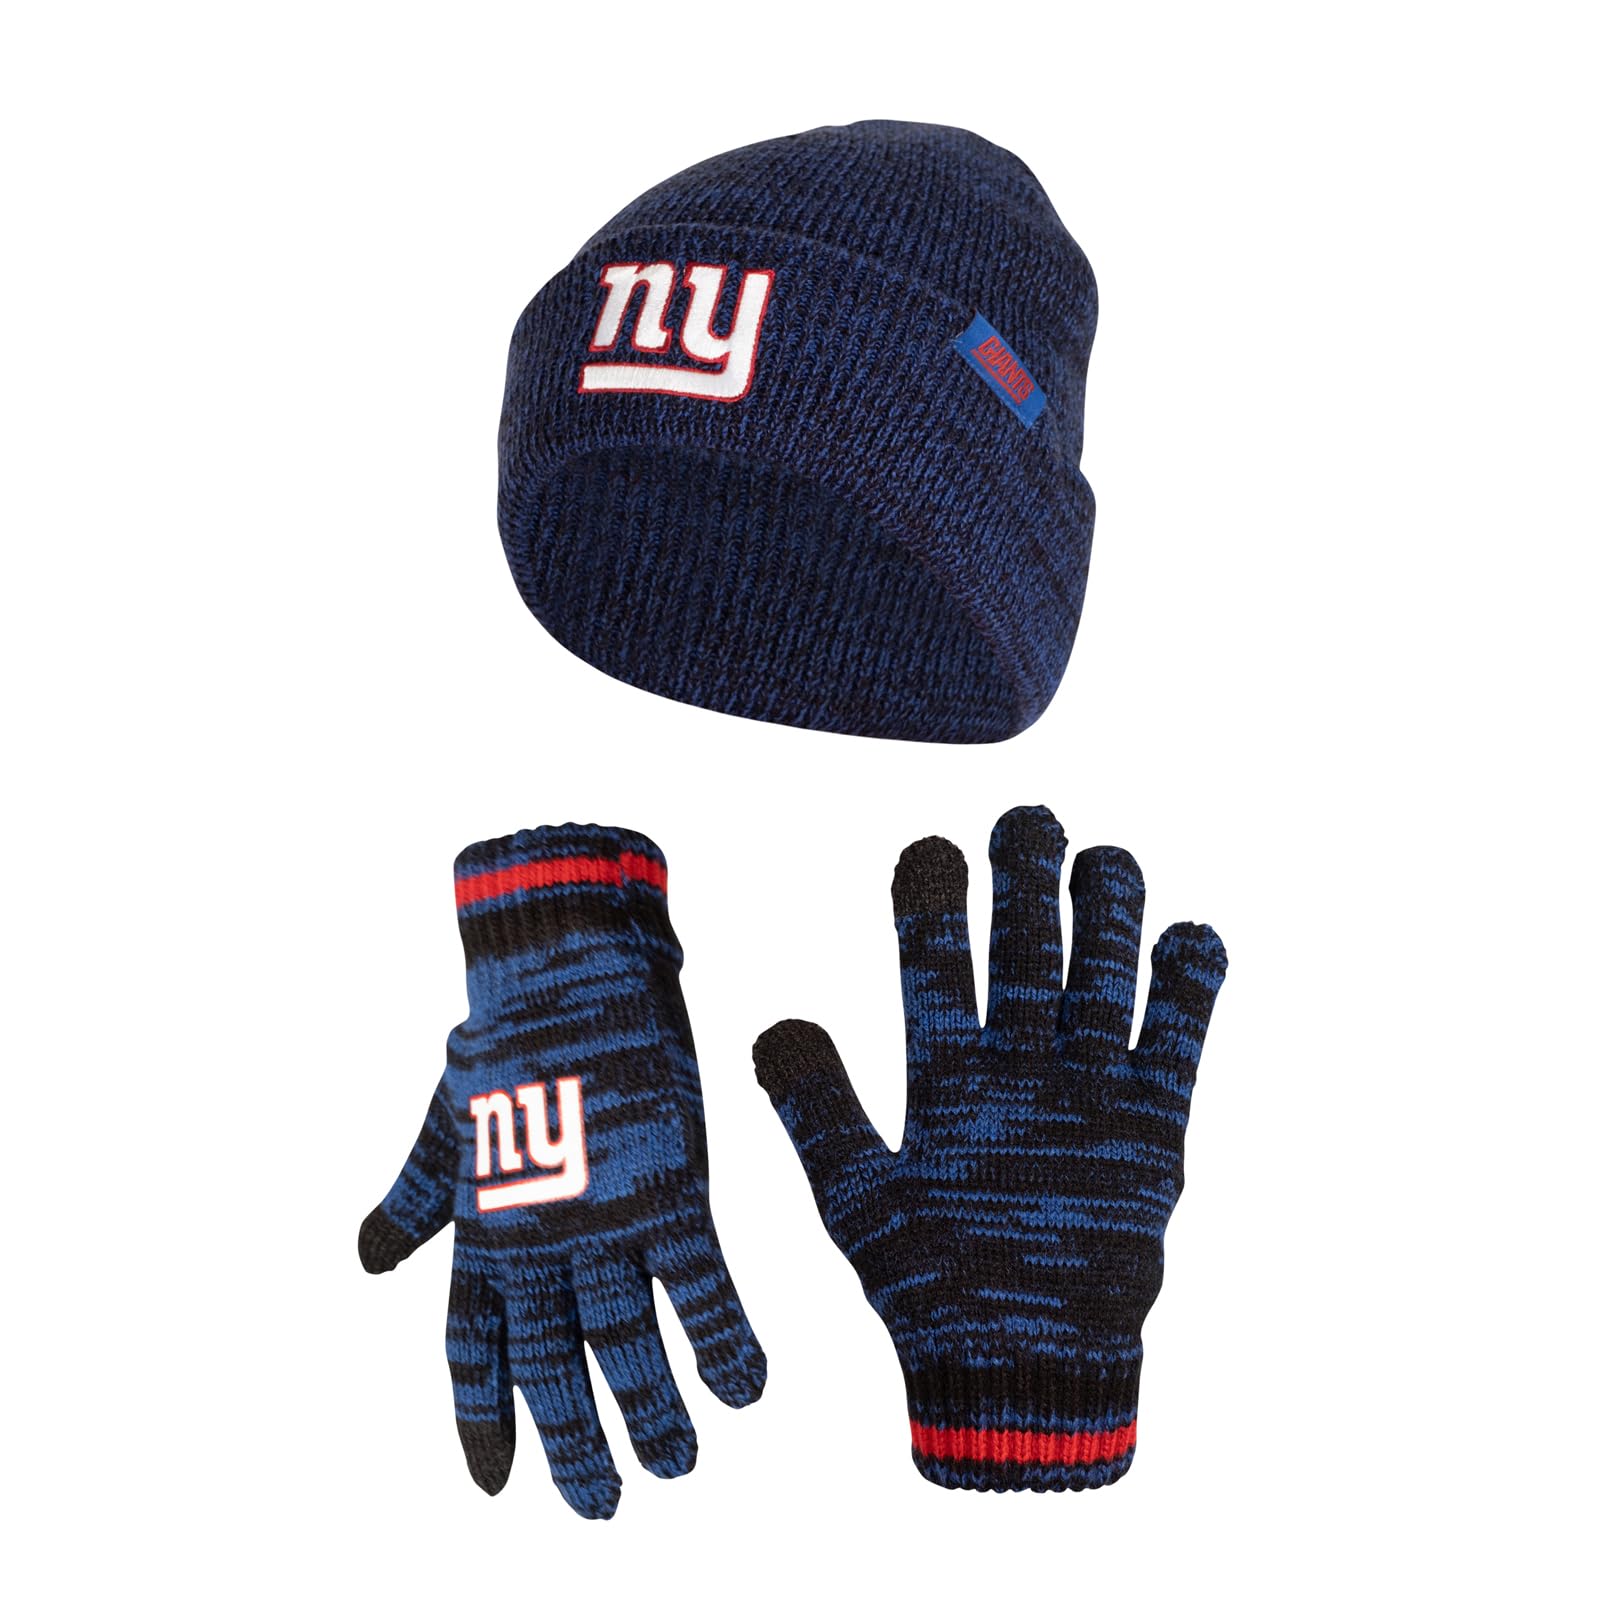 Ultra Game NFL New York Giants Youth Super Soft Marled Winter Beanie Knit Hat with Extra Warm Touch Screen Gloves|New York Giants